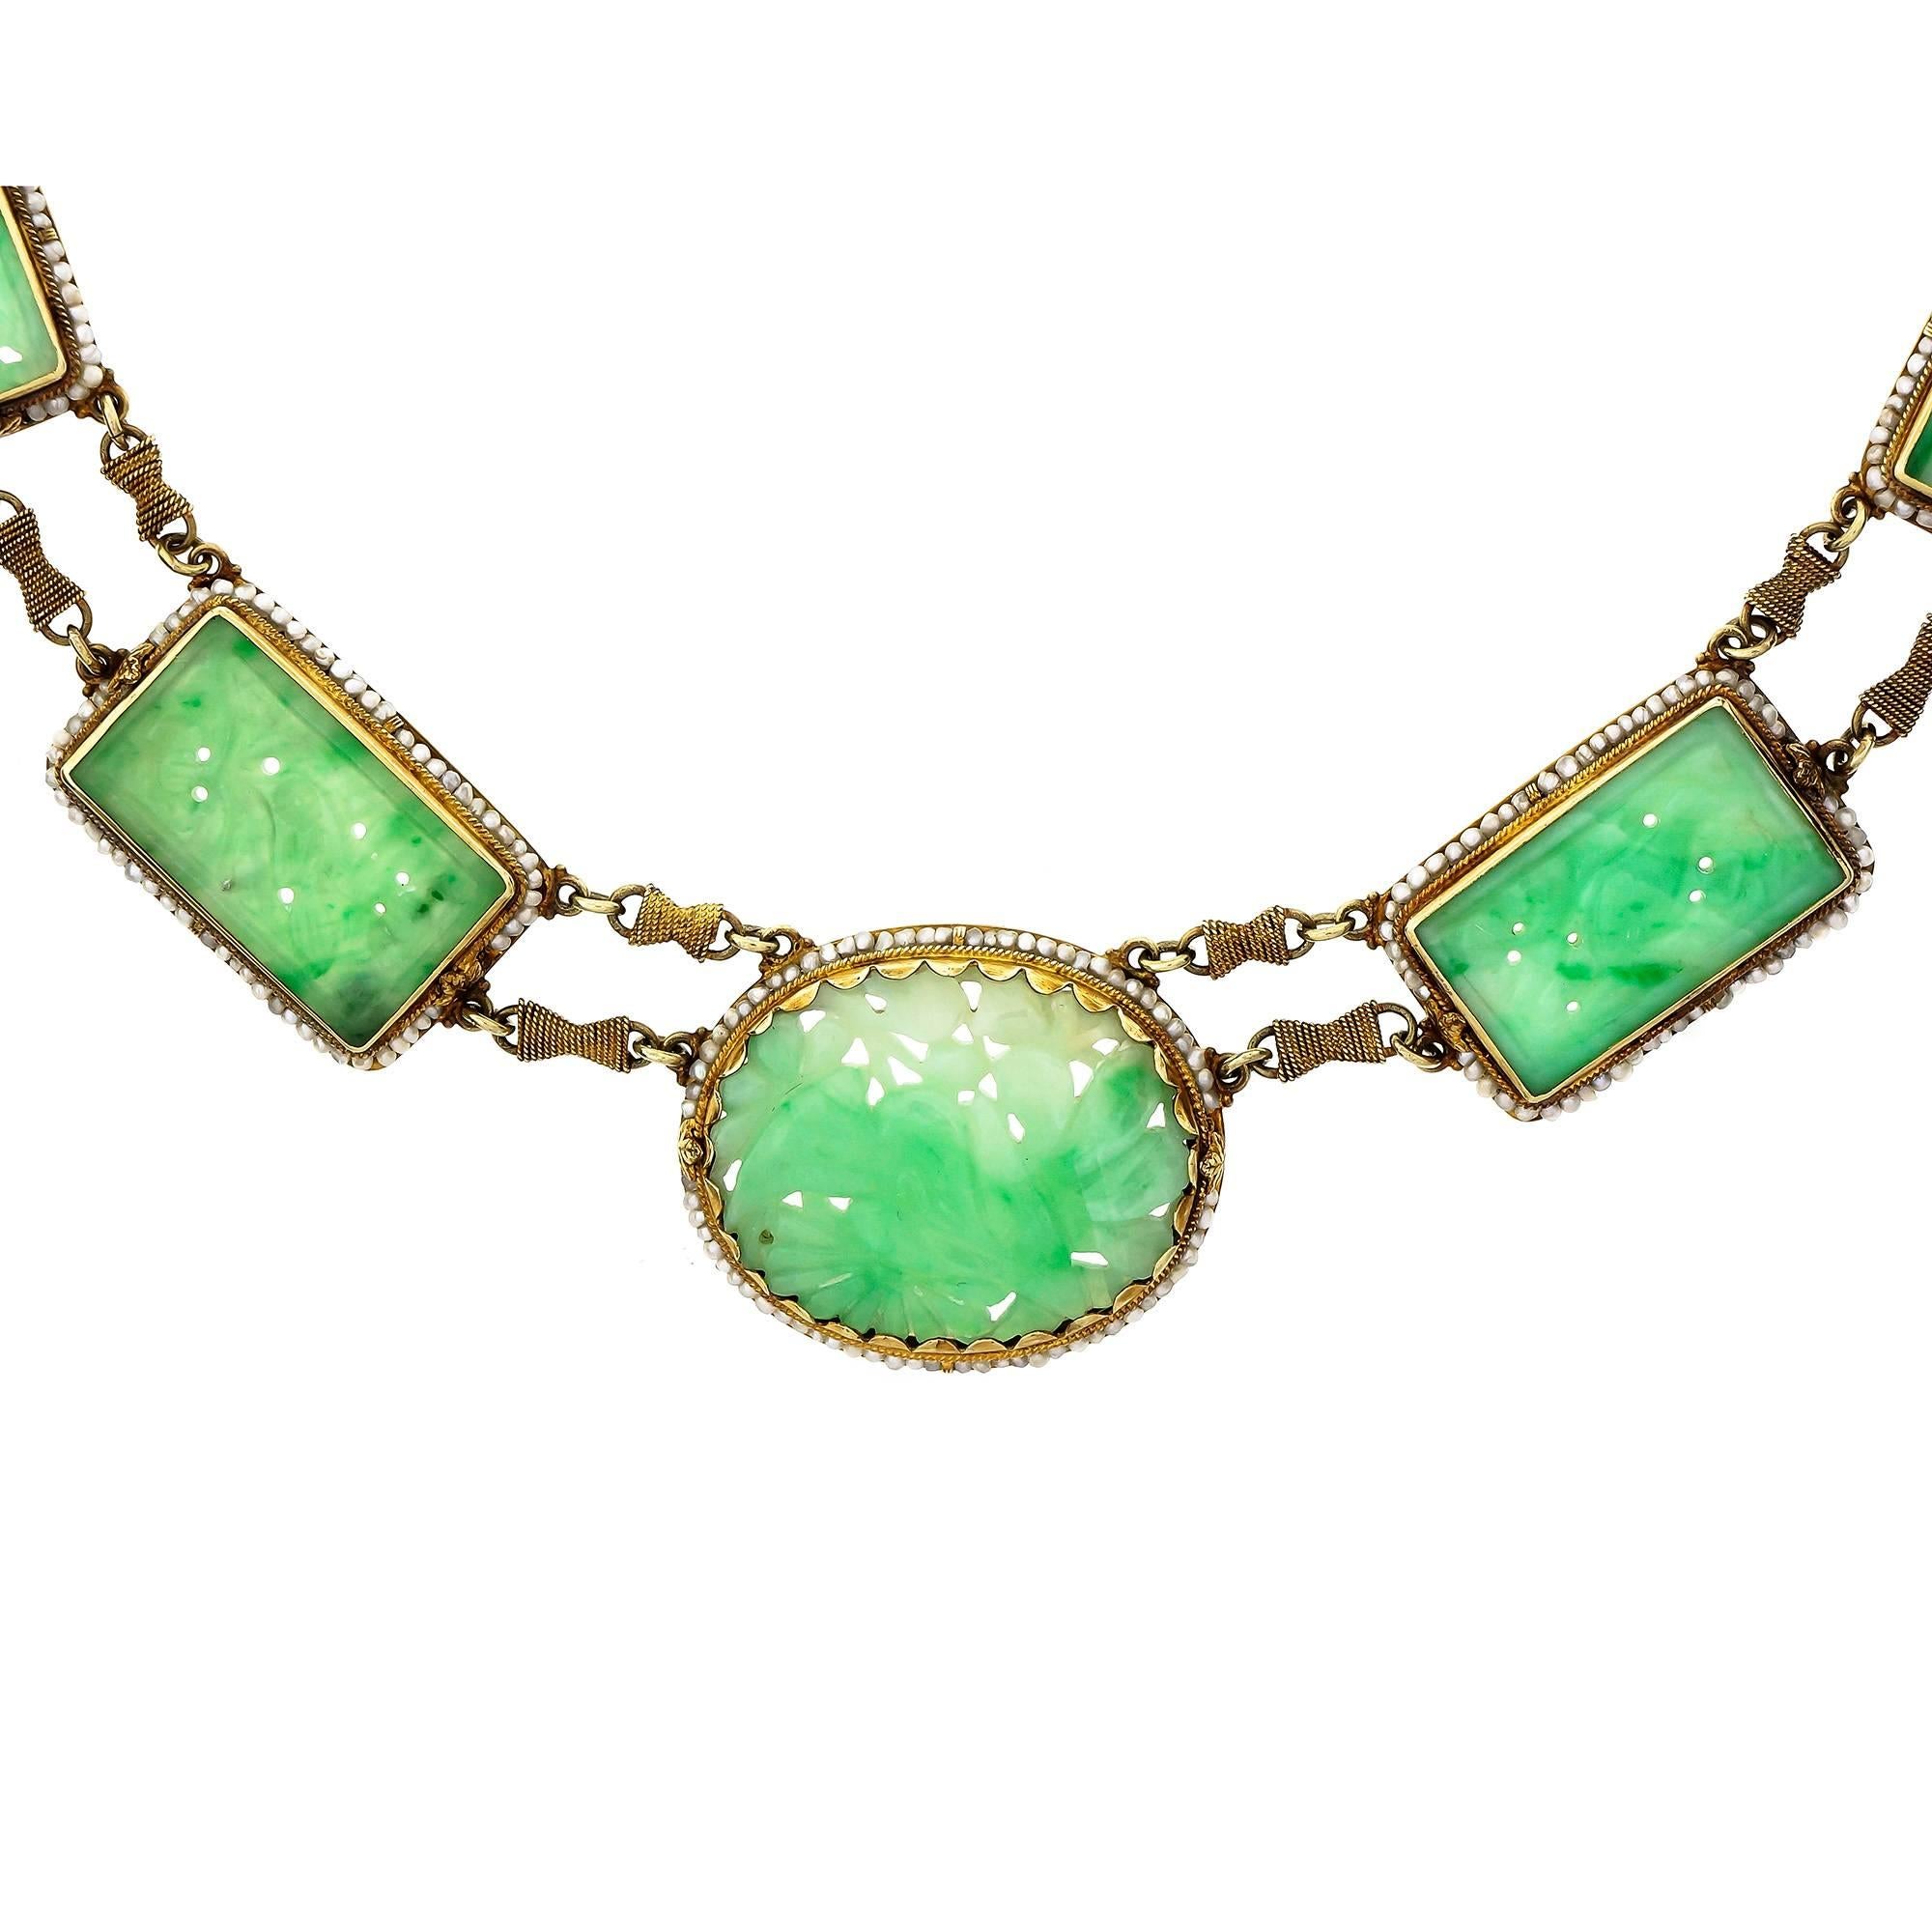 1910 completely handmade necklace with natural carved Jadeite Jade carved tablets surrounded by natural pearls on a handmade twisted wire link chain. All original with natural patina and not polished.

1 carved oval mottled green Jadeite Jade